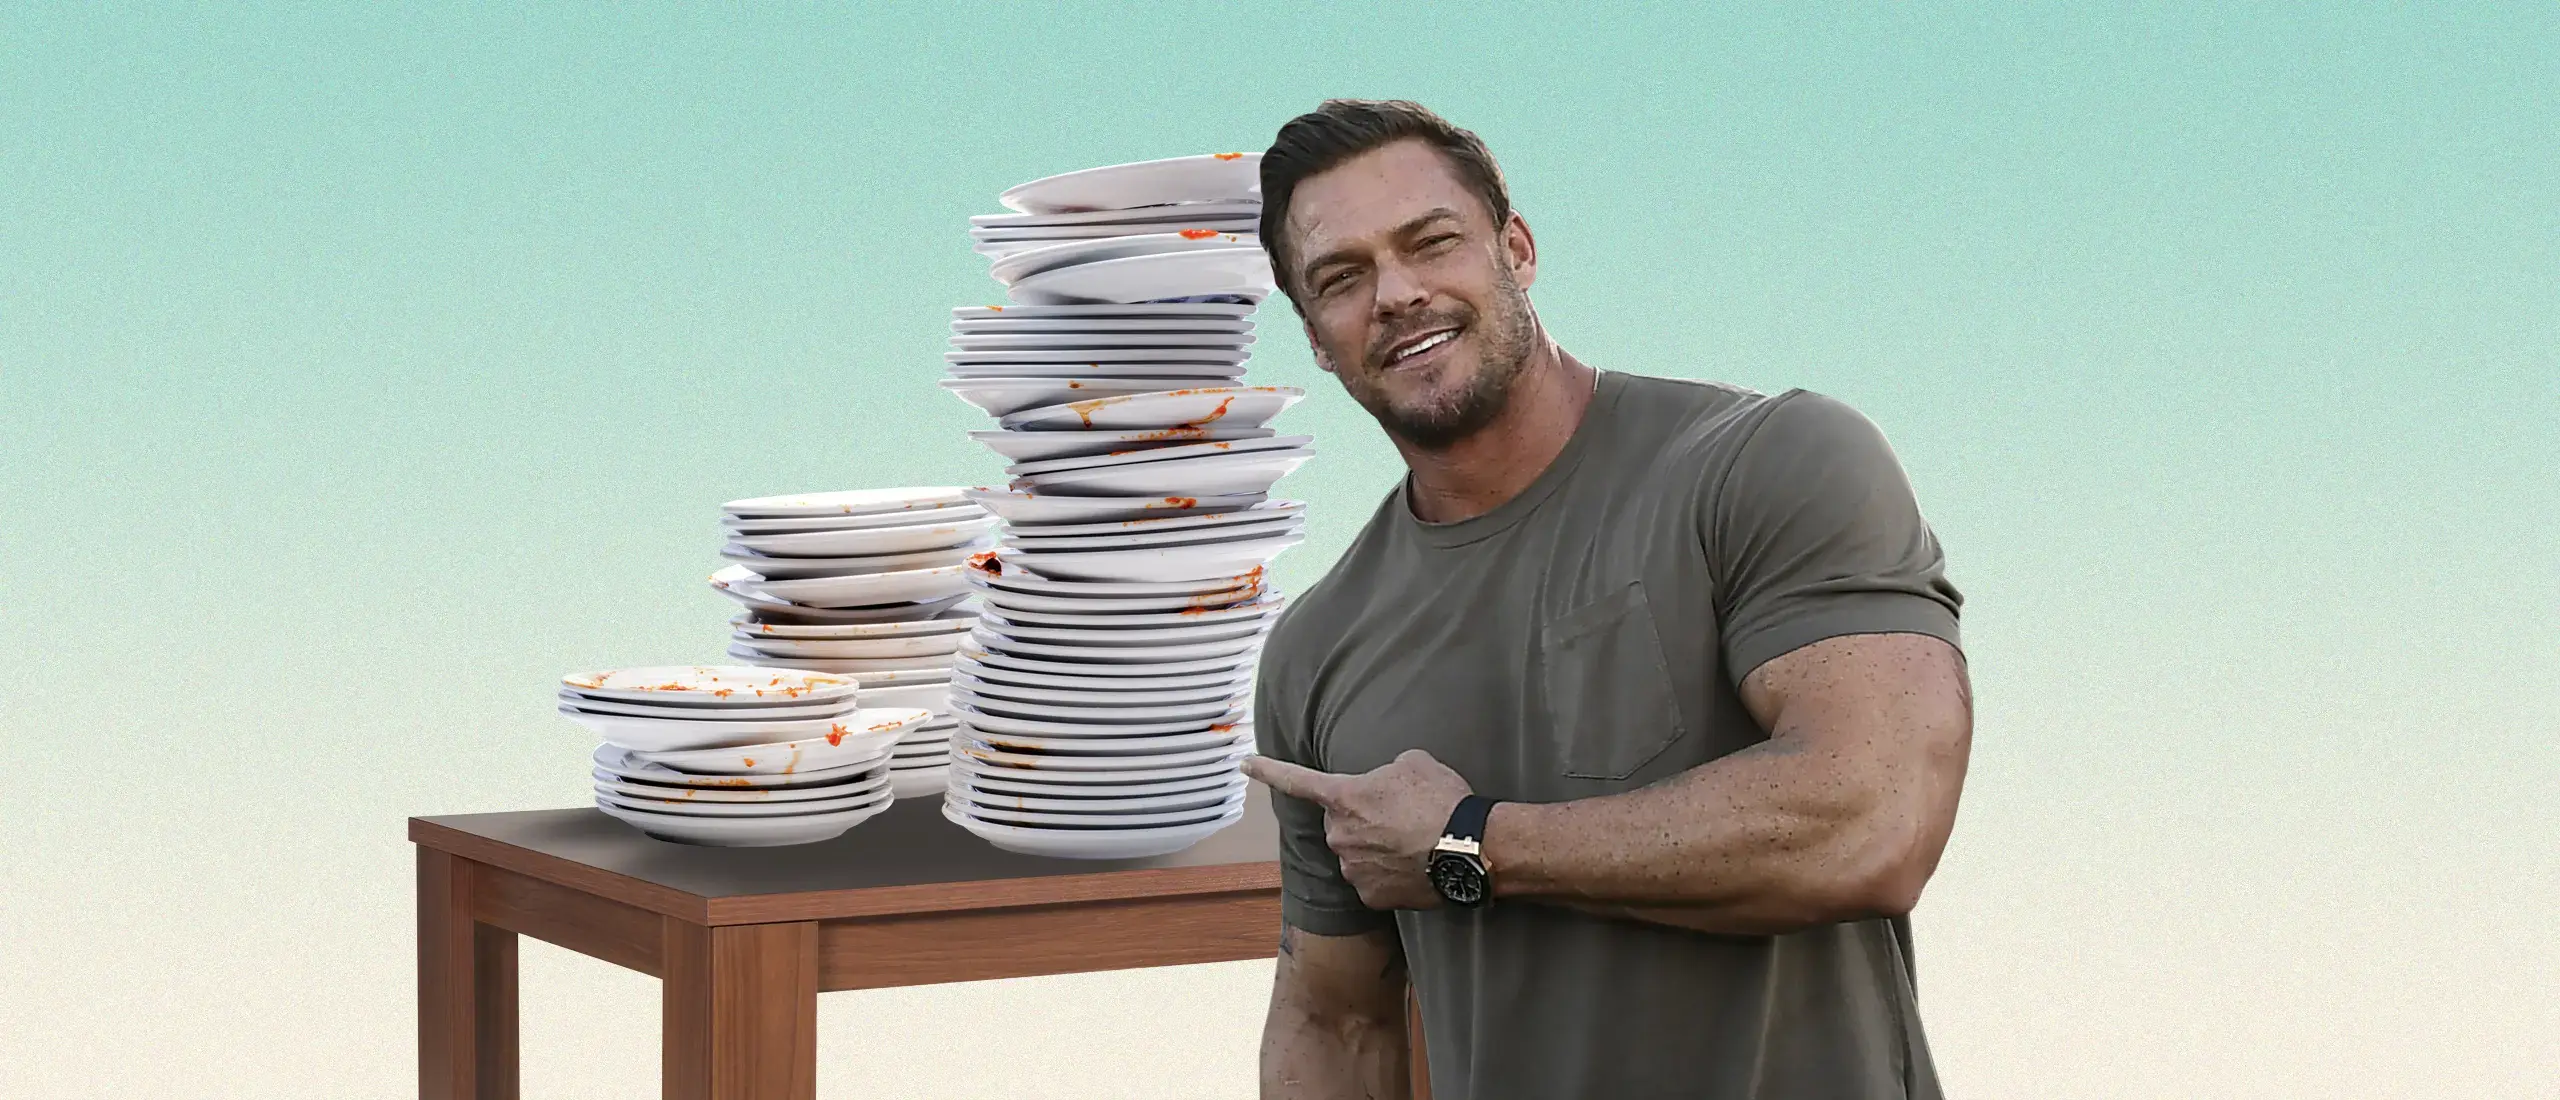 Alan Ritchson next to a pile of empty plates